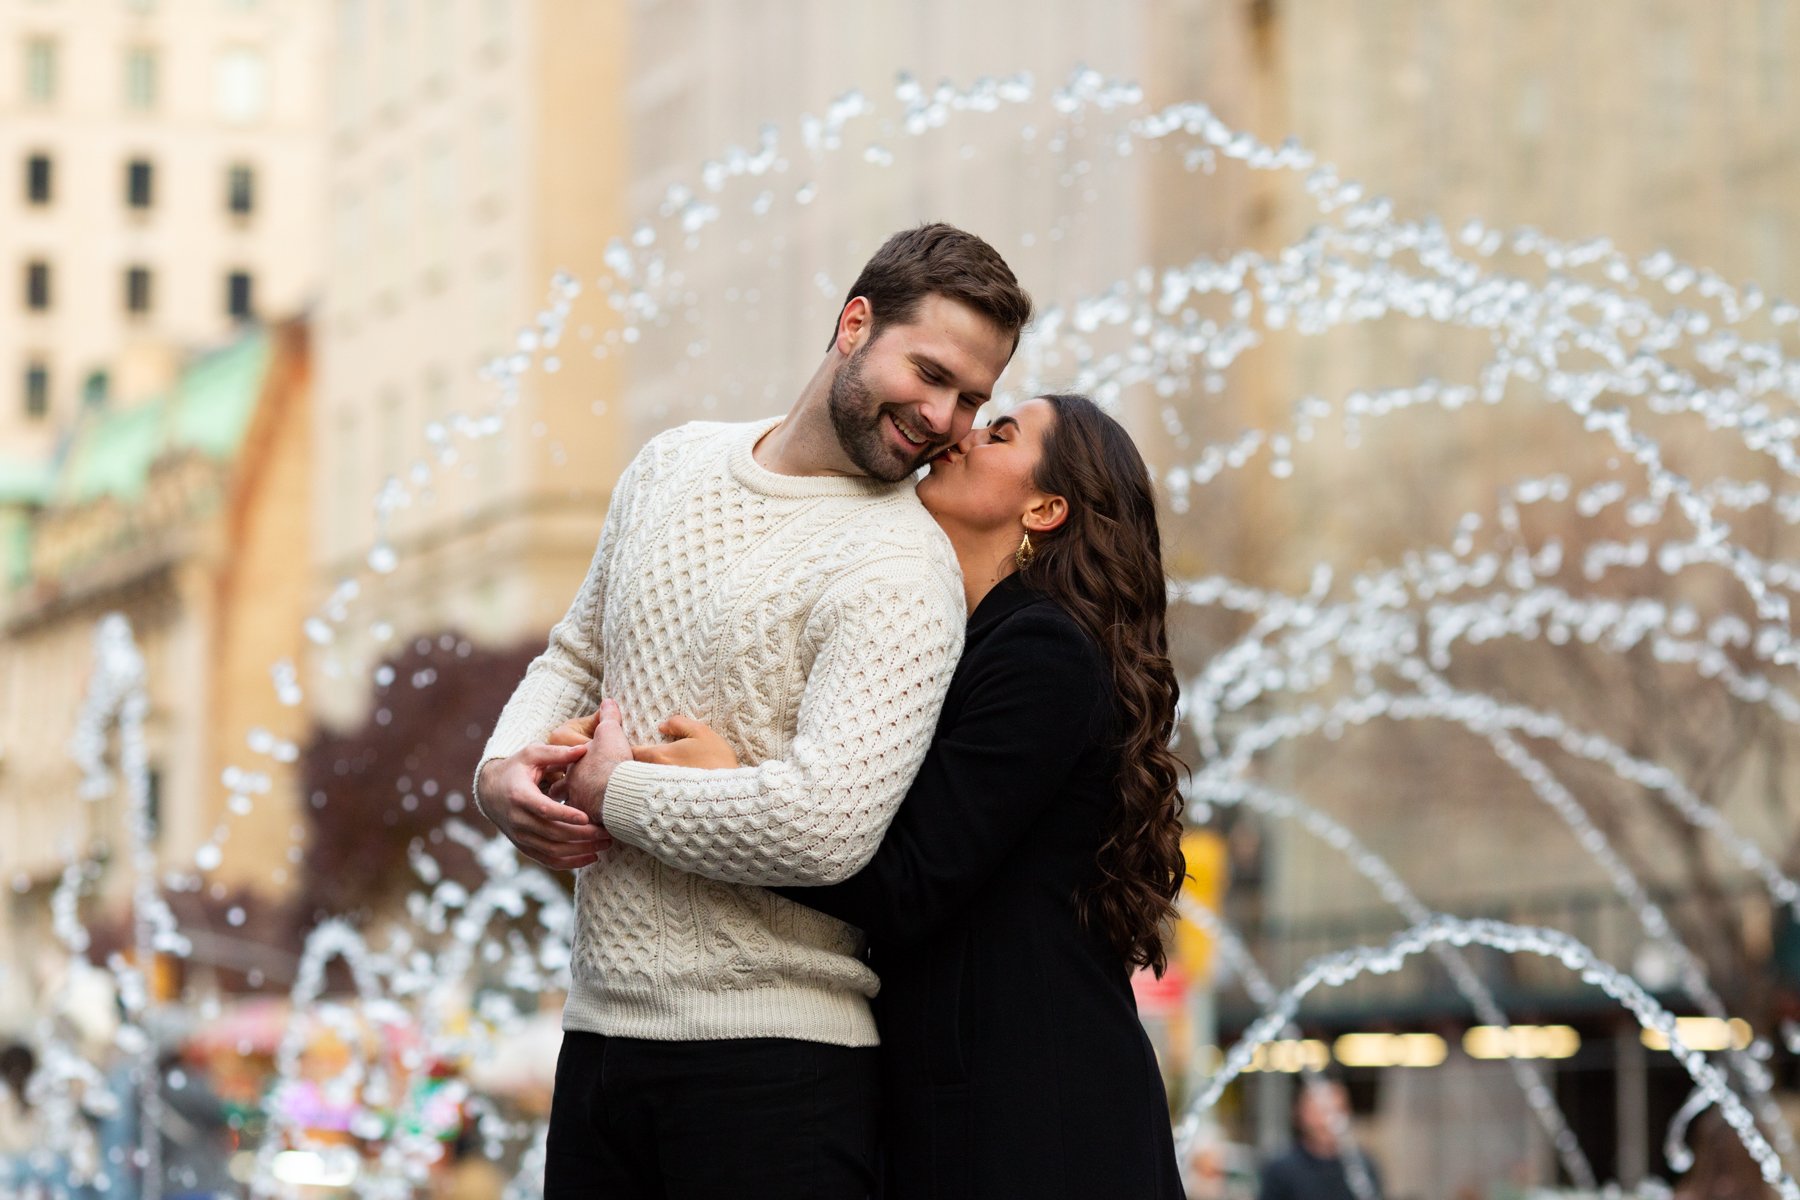 Central Park Fall Foliage Engagement Session NYC Photographer_0011.jpg